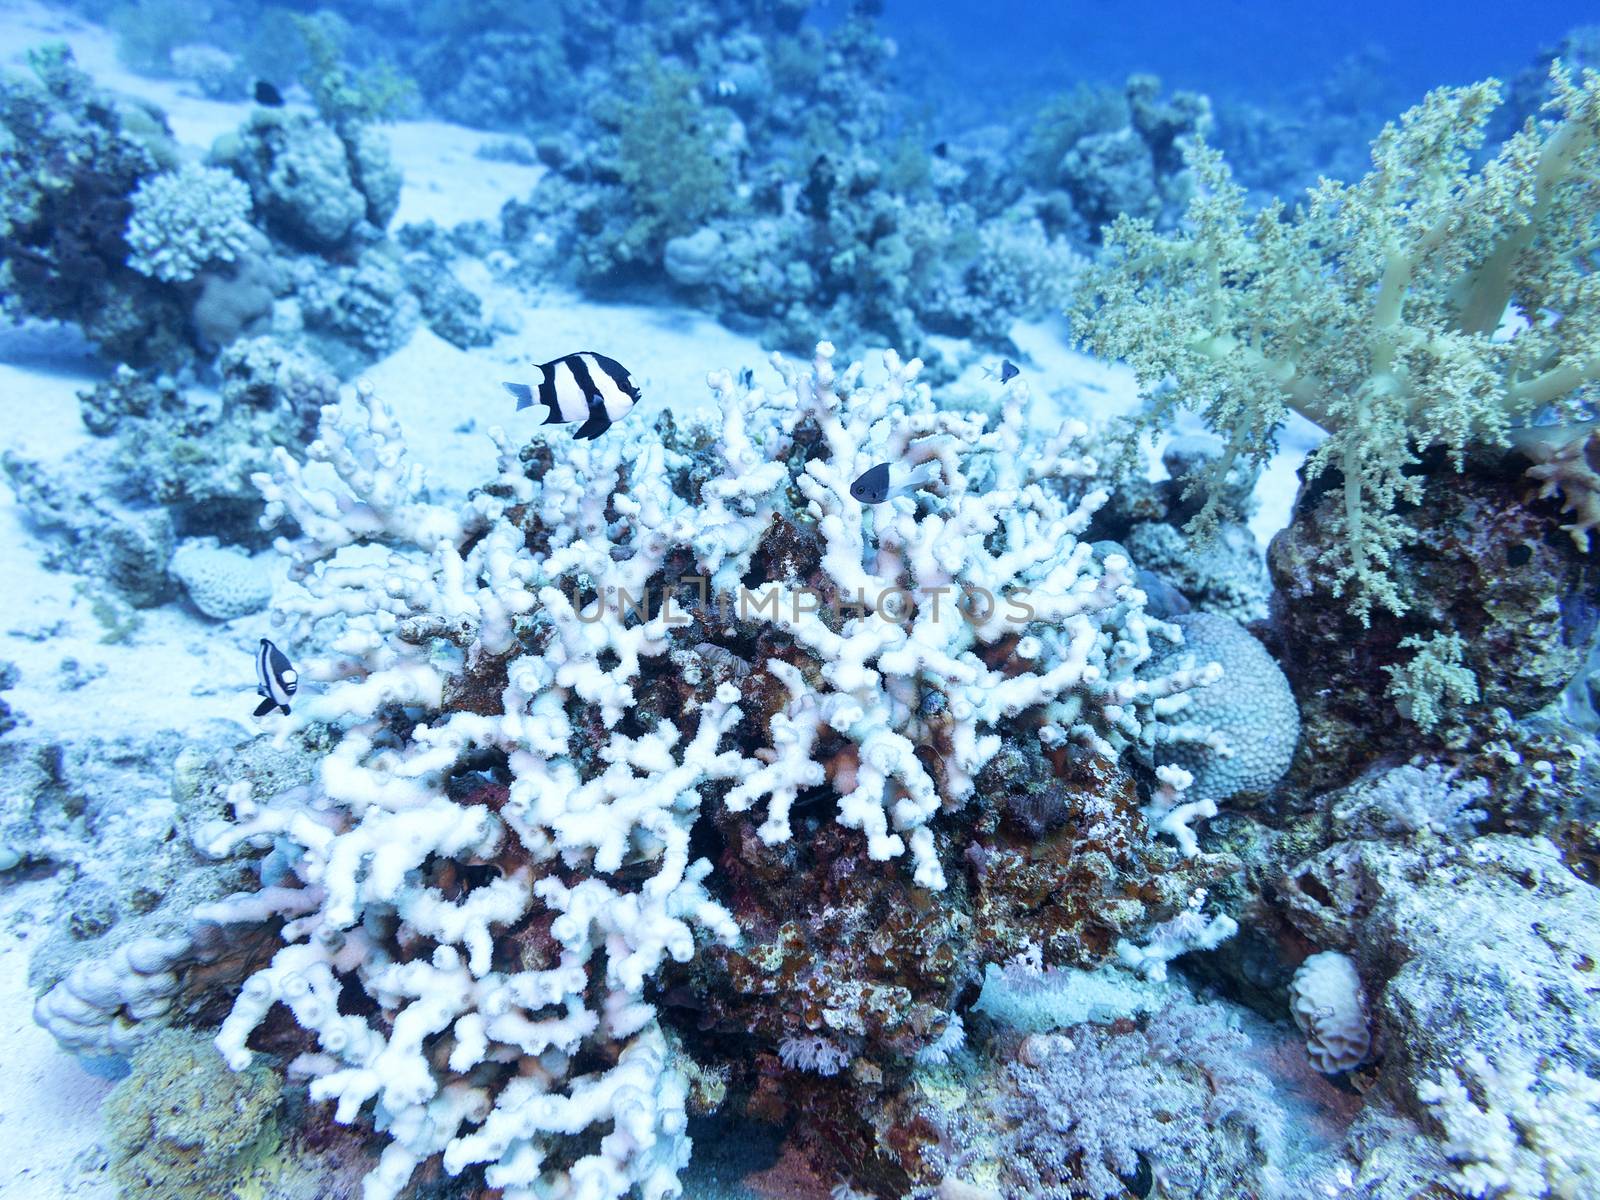 Coral reef at the bottom of tropical sea, underwater